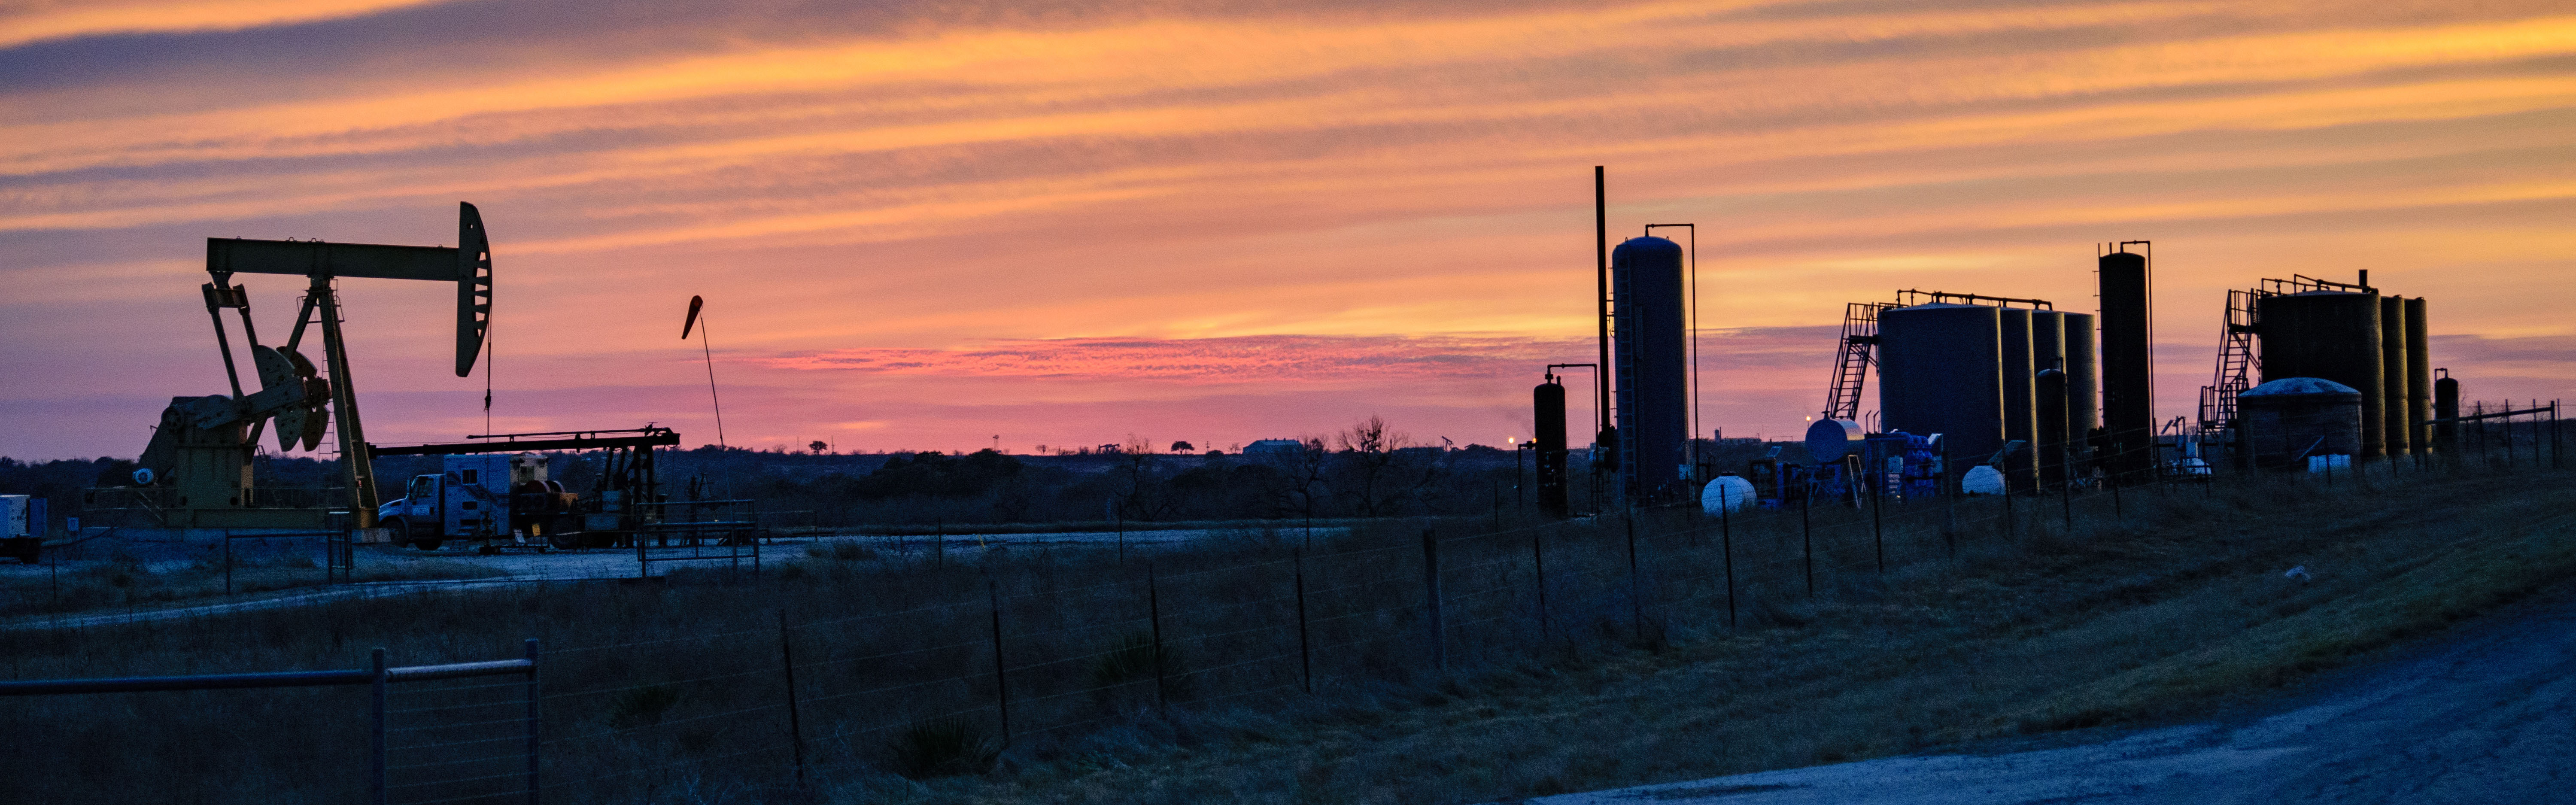 Oil and gas pump in field at sunset